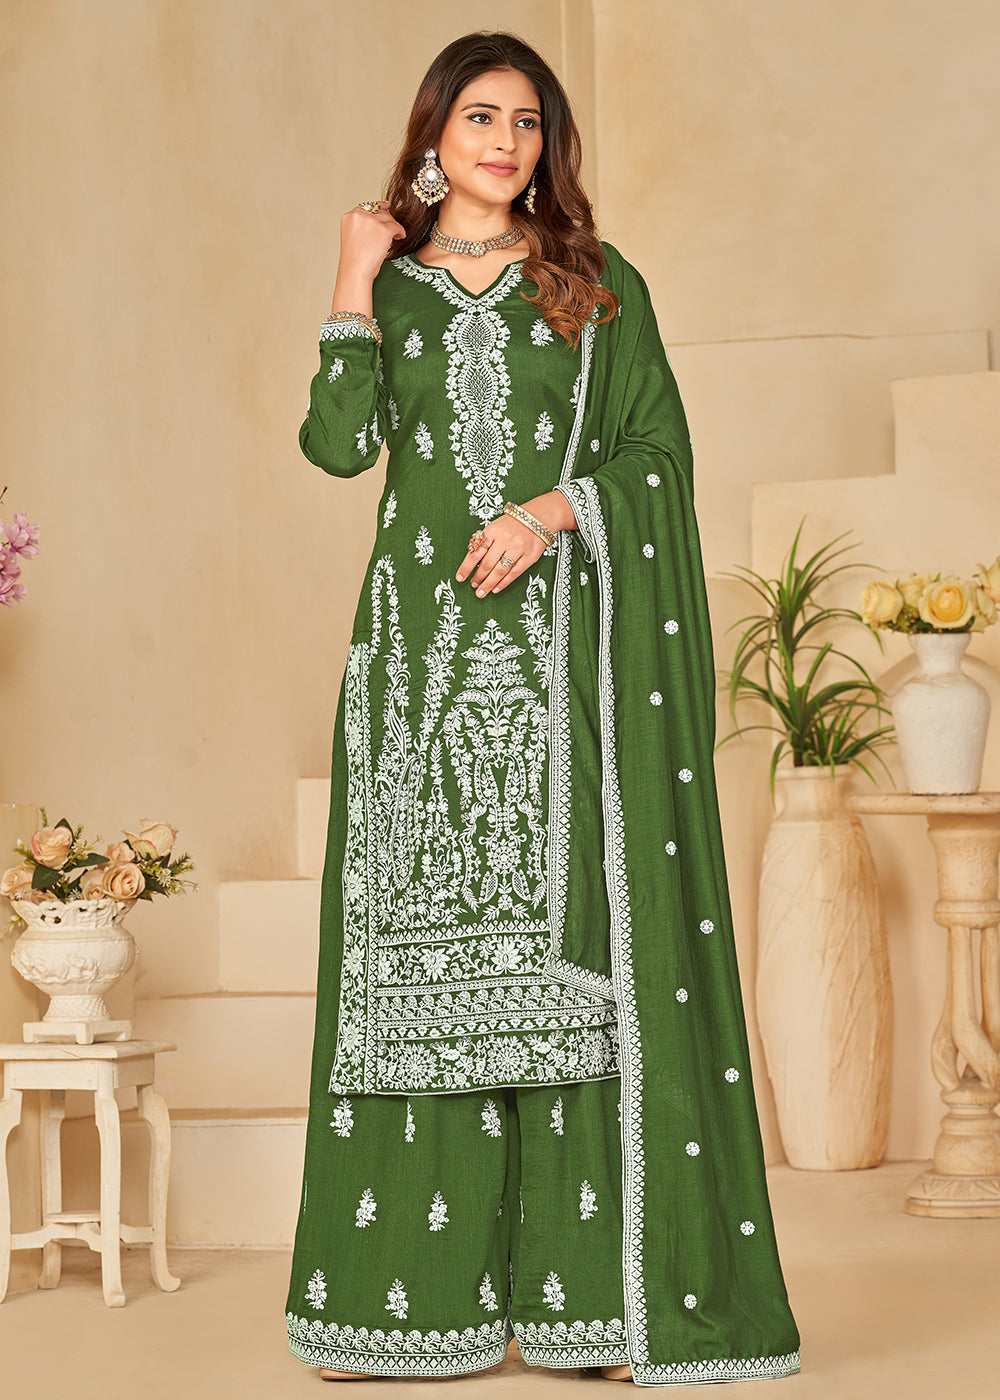 Buy Now Art Silk Pretty Green Embroidered Palazzo Style Suit Online in USA, UK, Canada, Germany, Australia & Worldwide at Empress Clothing.